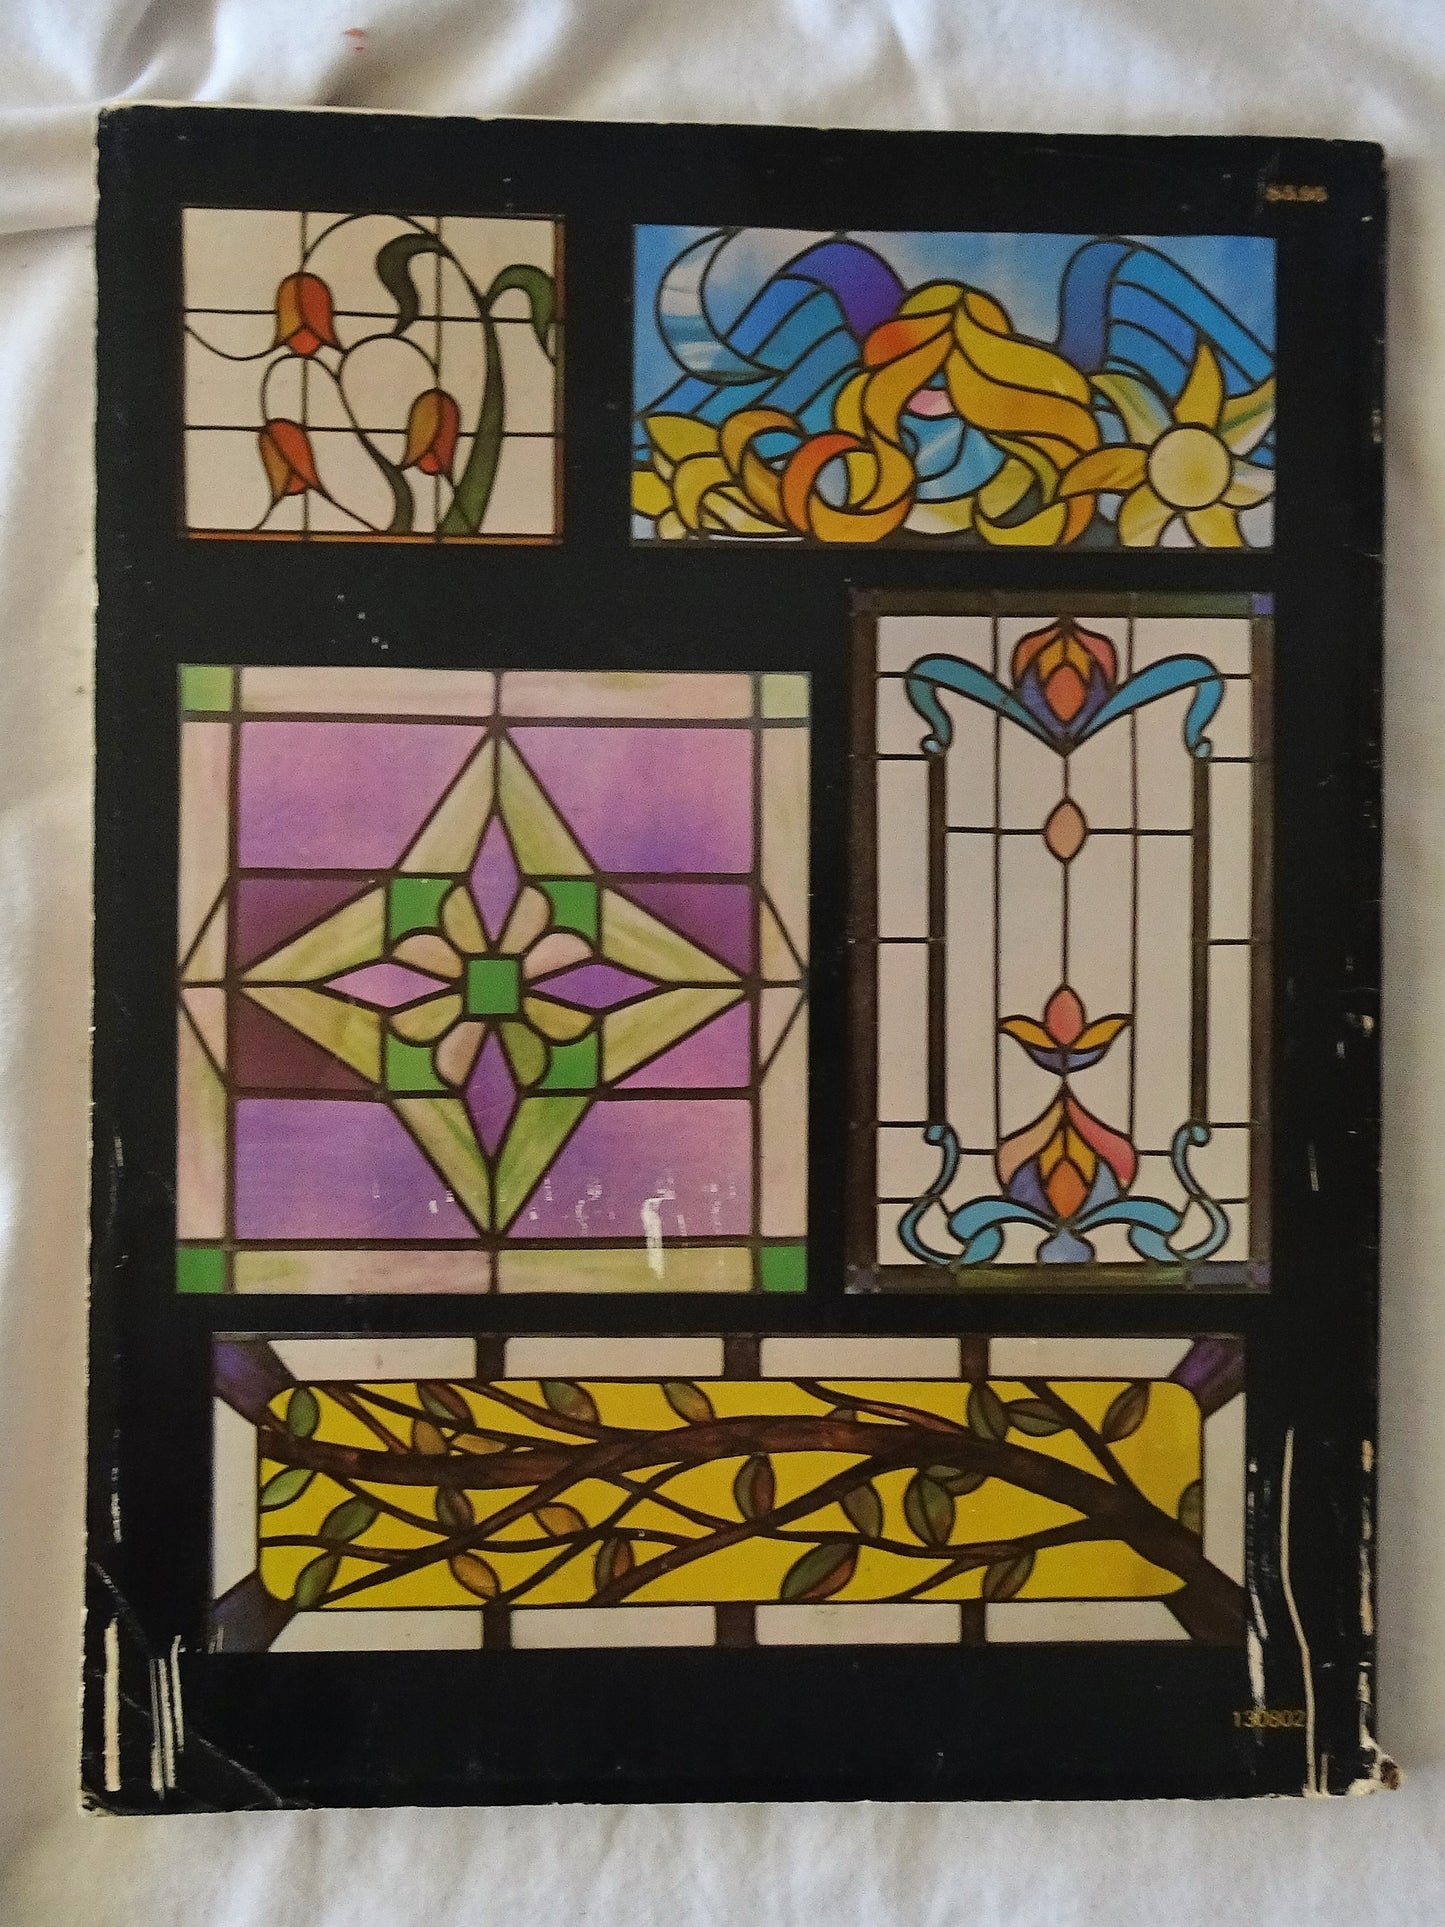 Stained Glass Window Art by Luciano